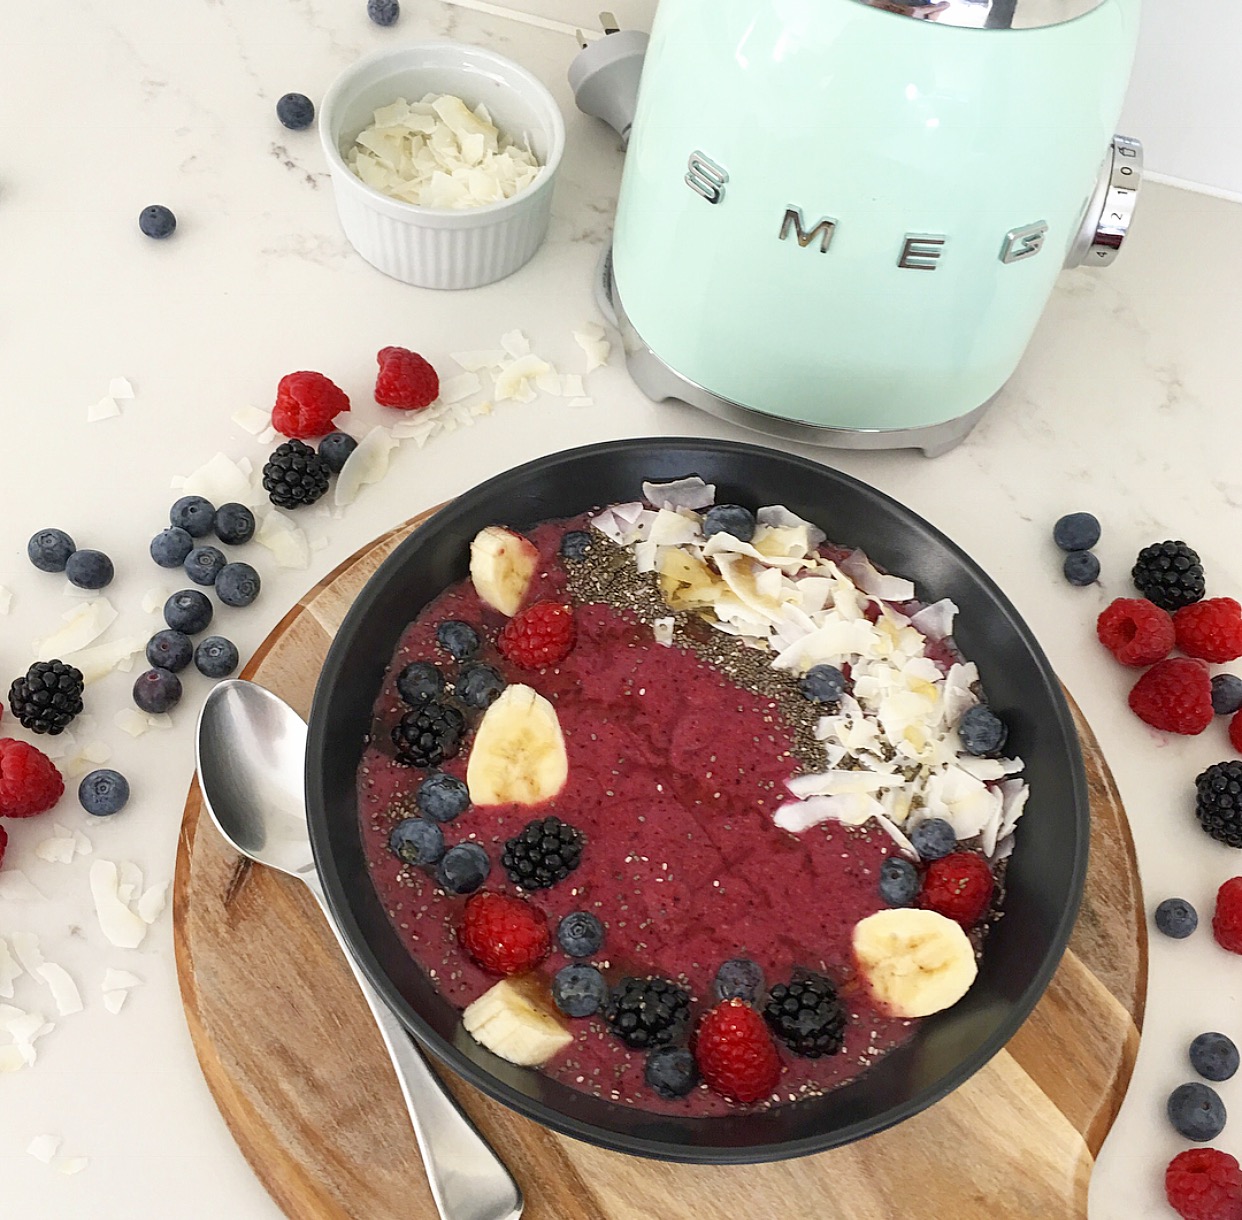 FRUITY SMOOTHIE BOWL BY OUR GIRL LAURA!